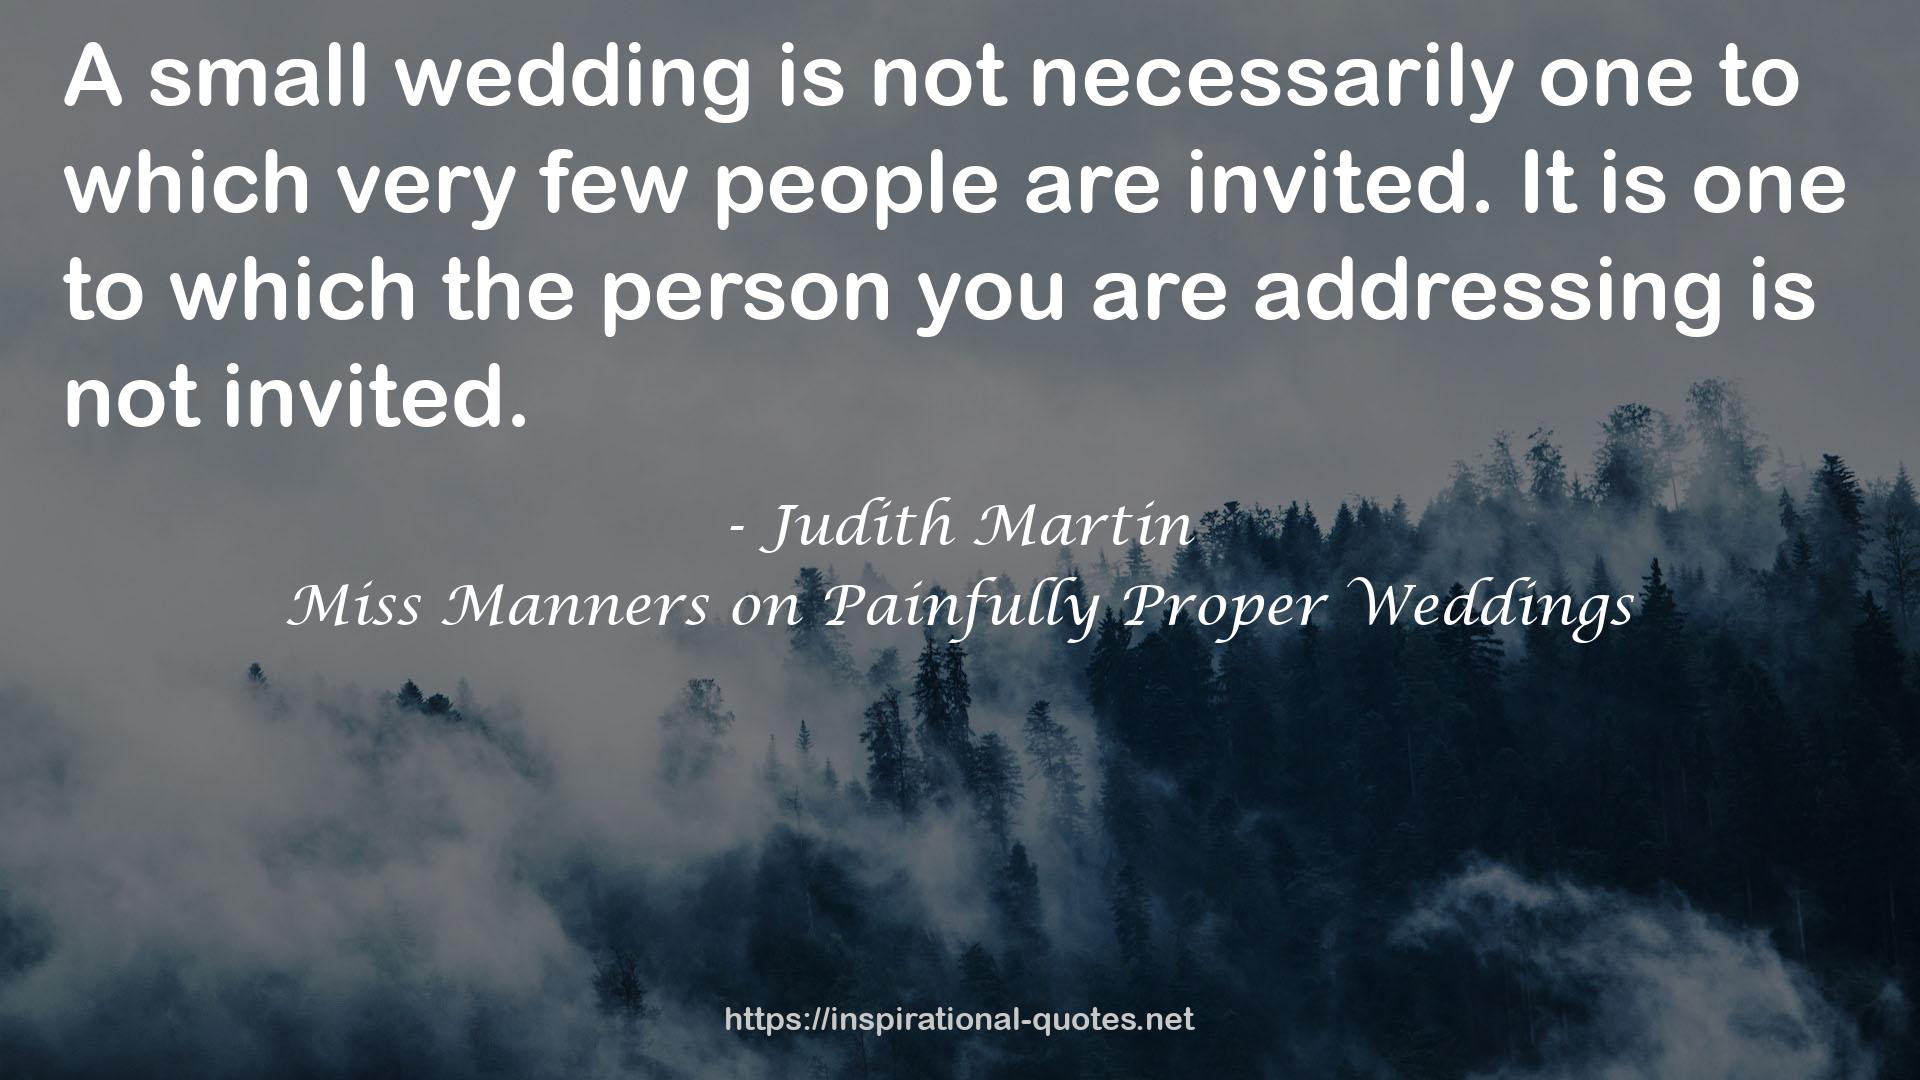 Miss Manners on Painfully Proper Weddings QUOTES